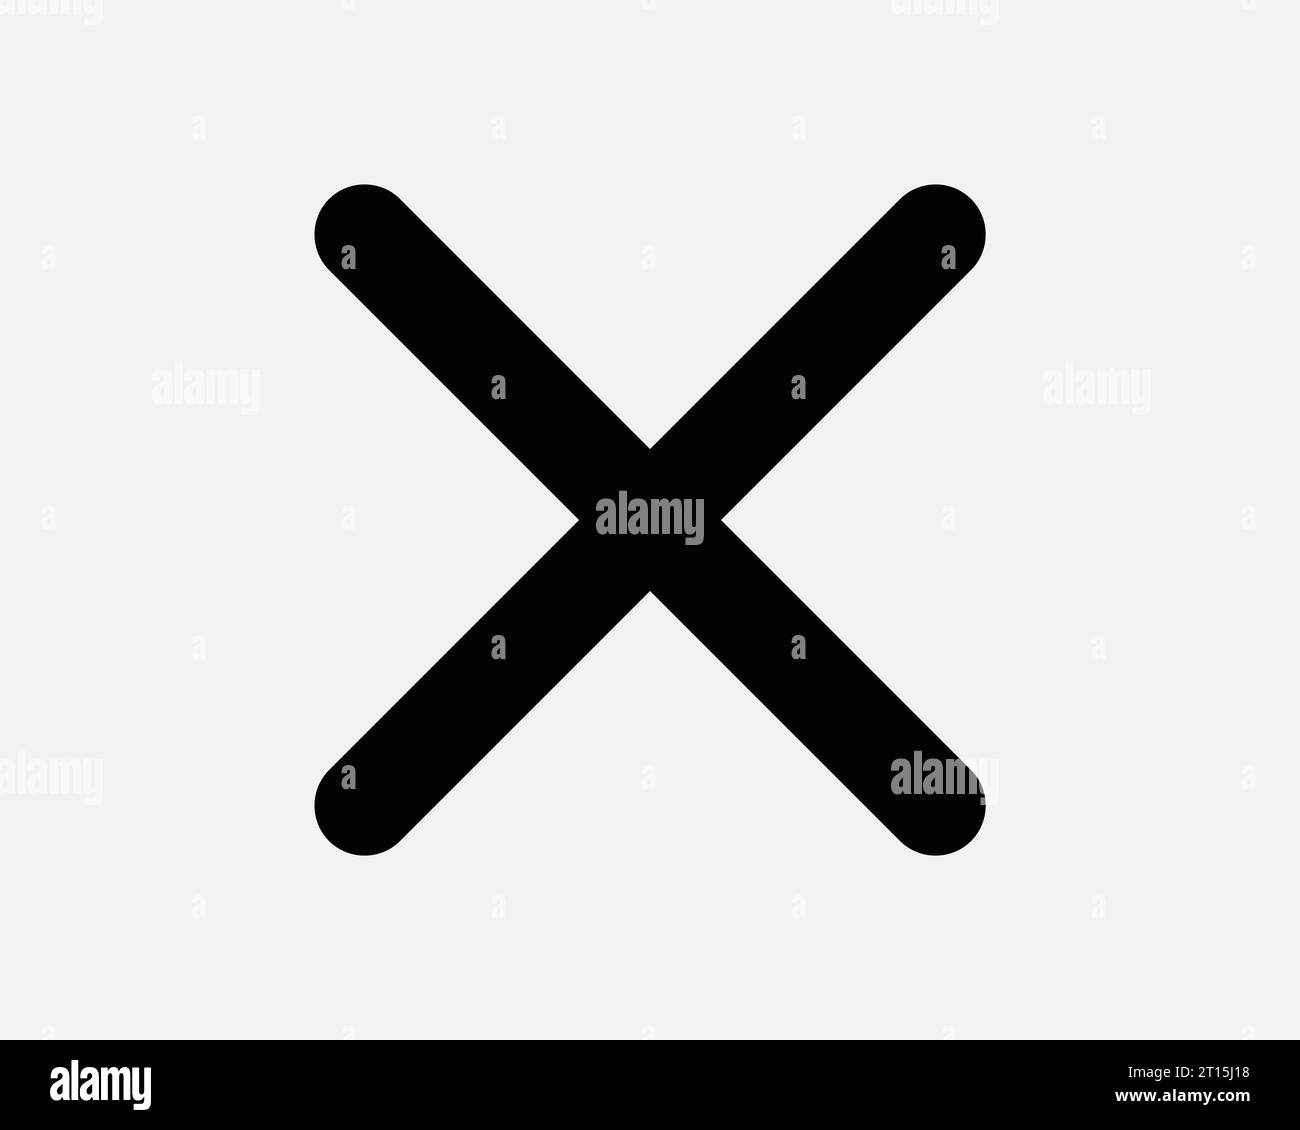 Cancel Cross Block Prohibited Not Allowed Cannot Denied Reject Rejected Wrong X Mark Vote Deny Black White Outline Line Shape Sign Symbol EPS Vector Stock Vector